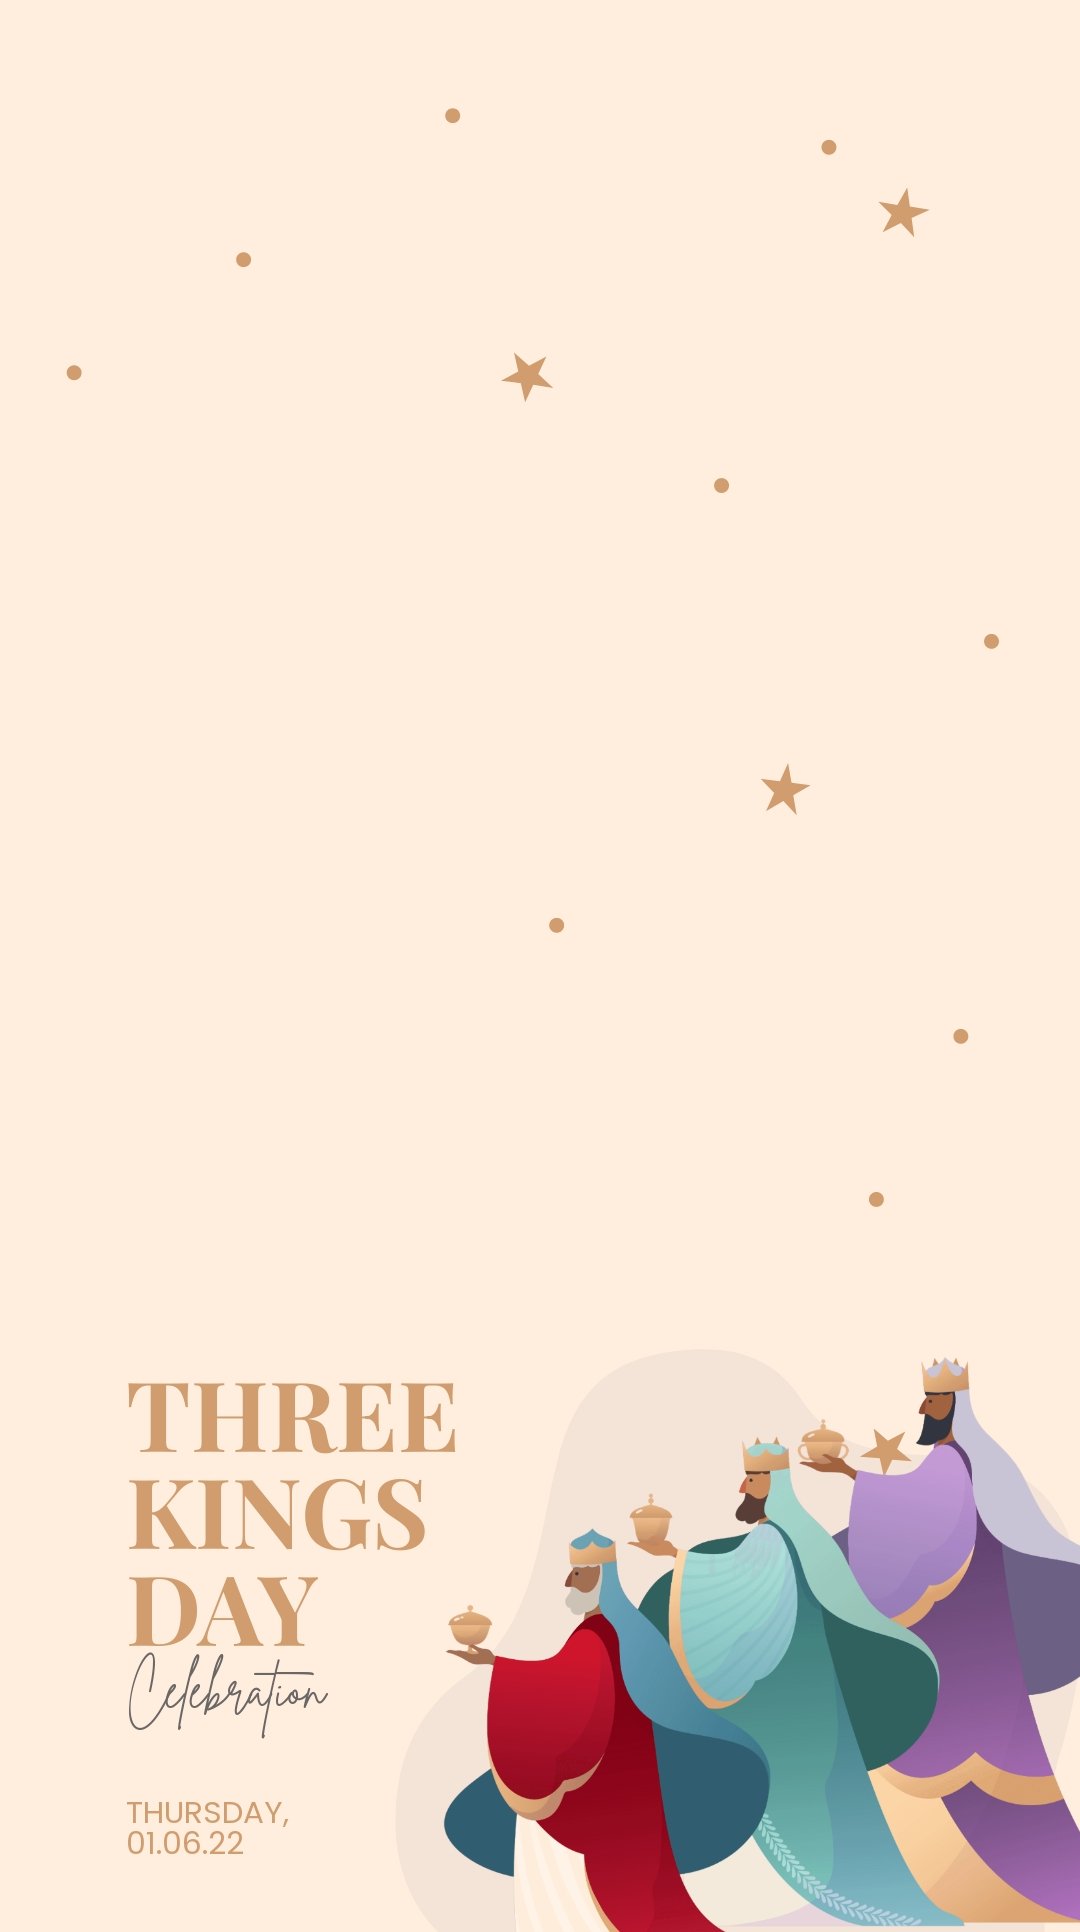 Three Kings Day Celebration Snapchat Geofilter Template